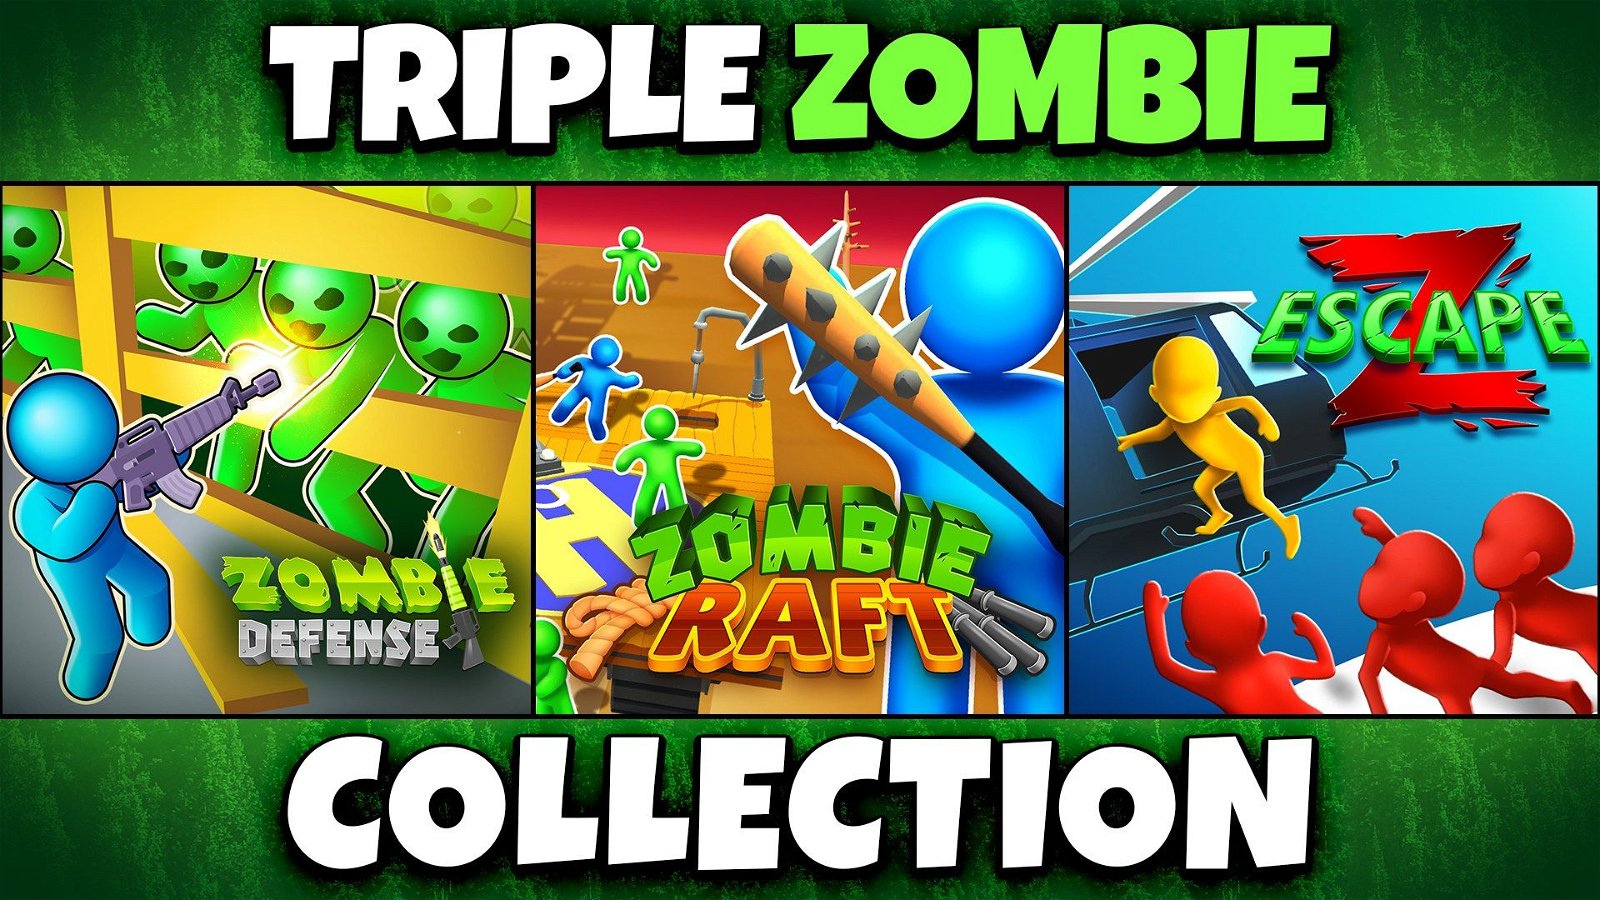 Image of Triple Zombie Collection